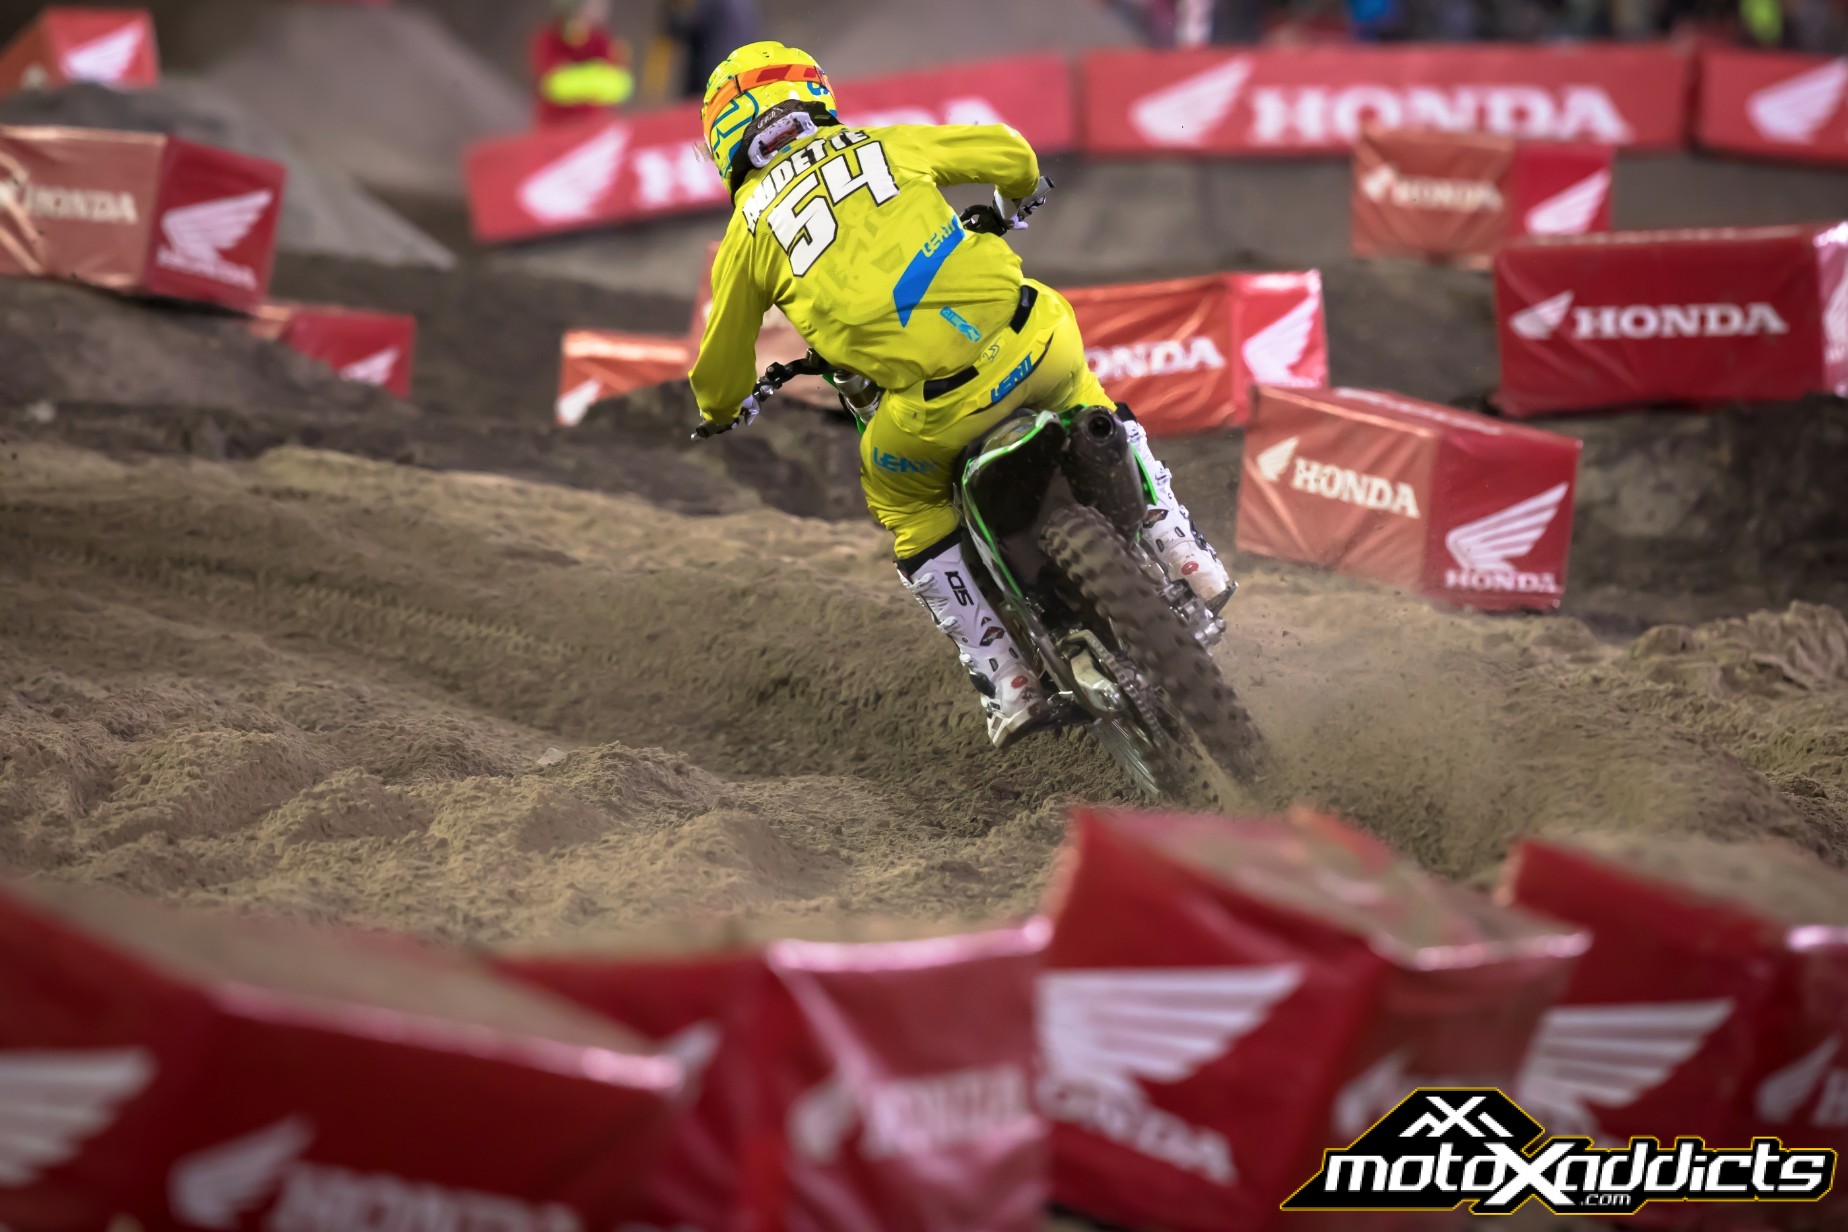 Gannon currently sits 12th in the 250SX East points.